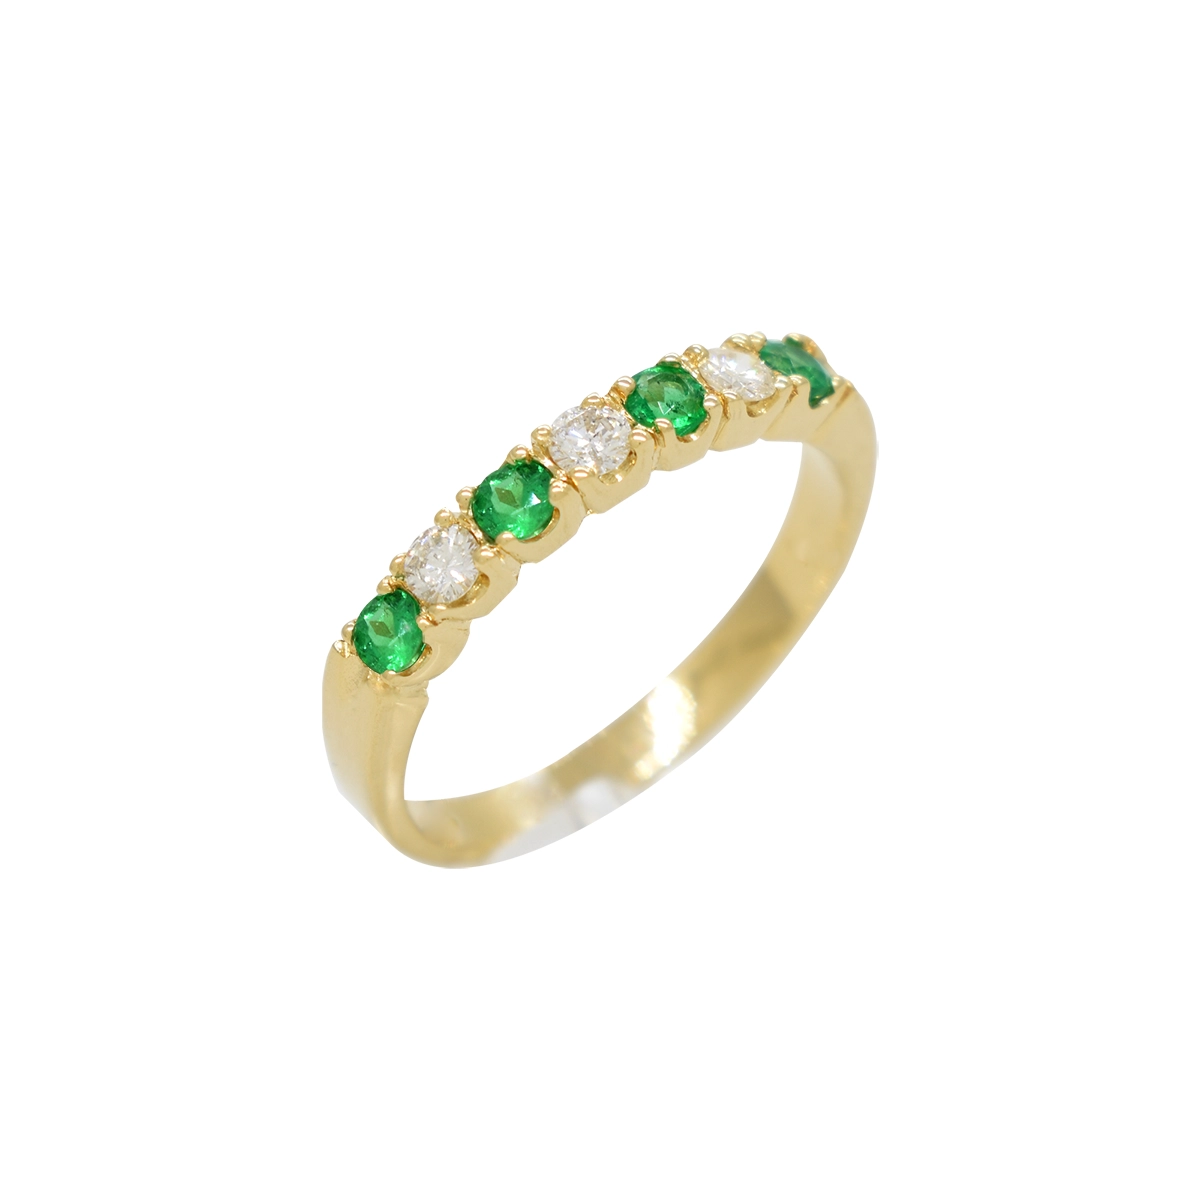 Emerald and Diamond Wedding Band in 18K Gold Classic Prong Setting